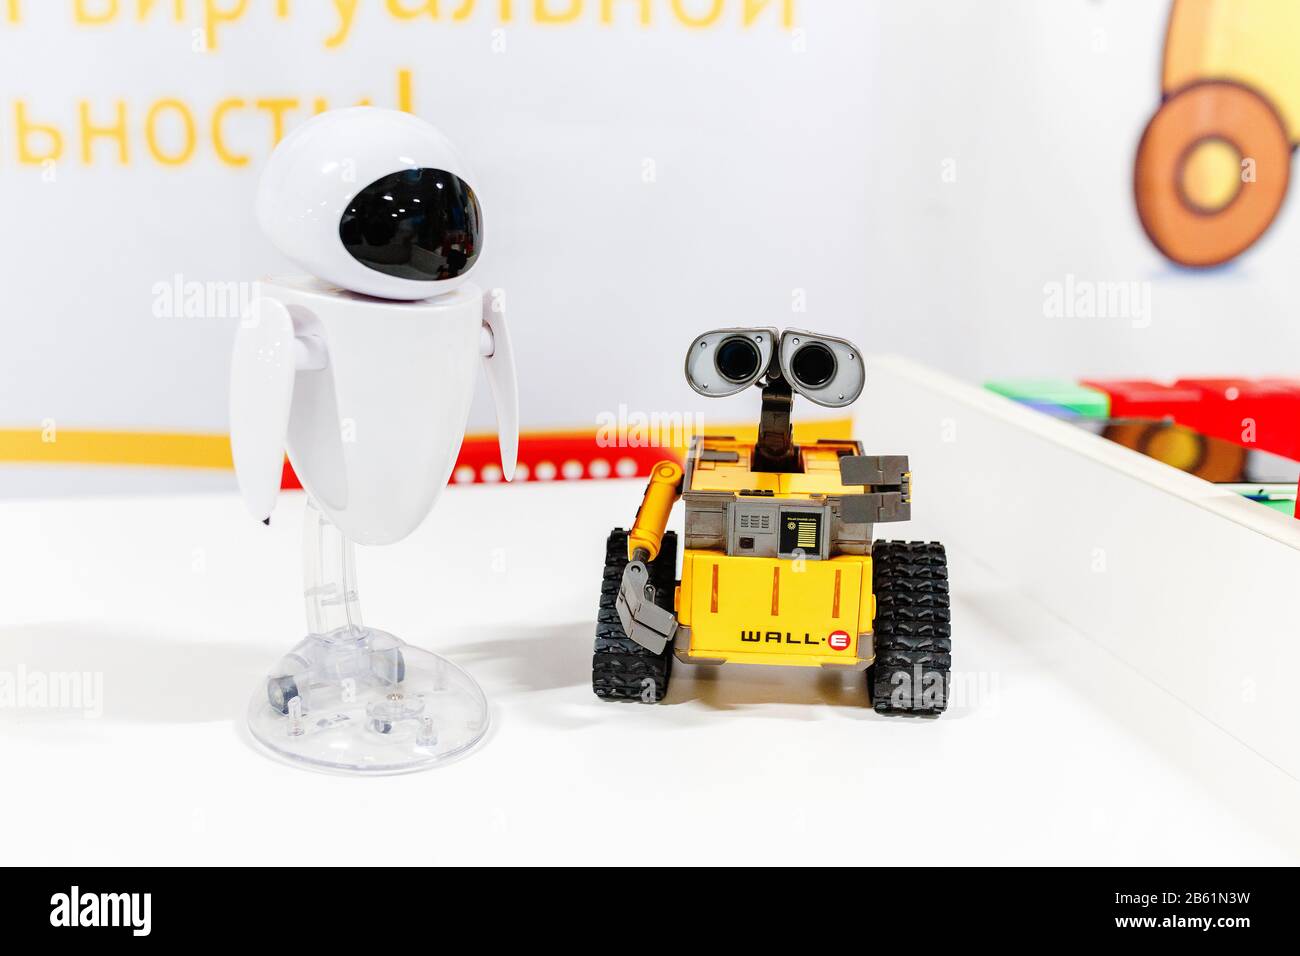 ULTRA MALL, UFA, RUSSIA, 21 AUGUST, 2017: Working replica robots Wall-E and Eva from the cartoon movie Stock Photo